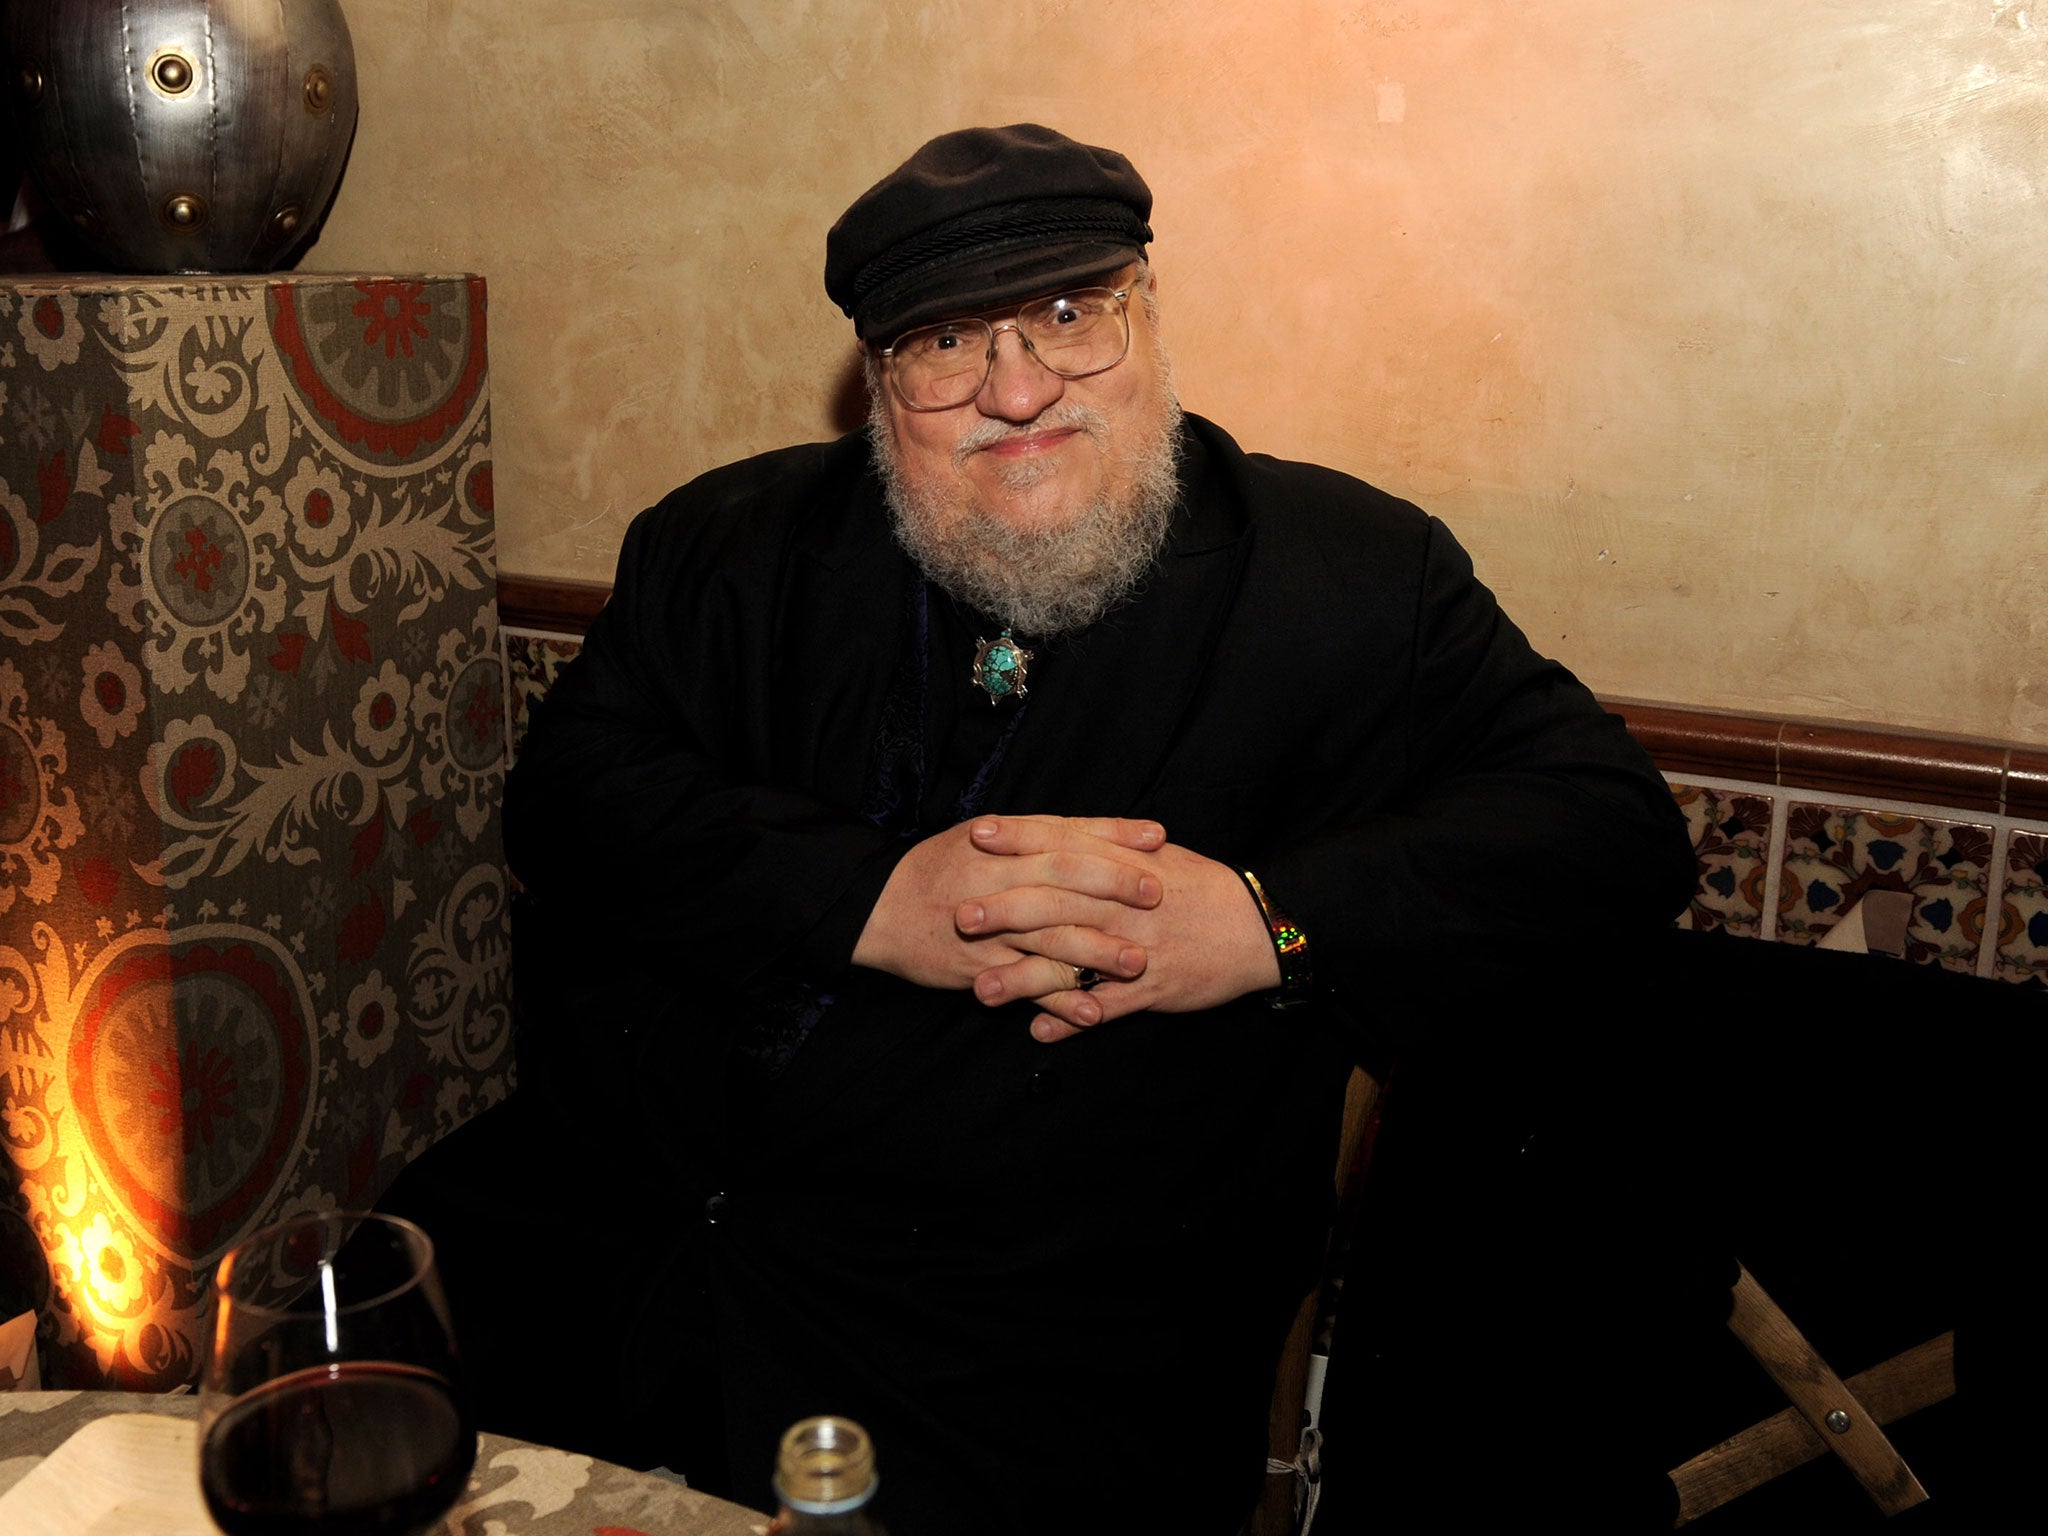 Game of Thrones author George RR Martin remains open-minded about a feature film